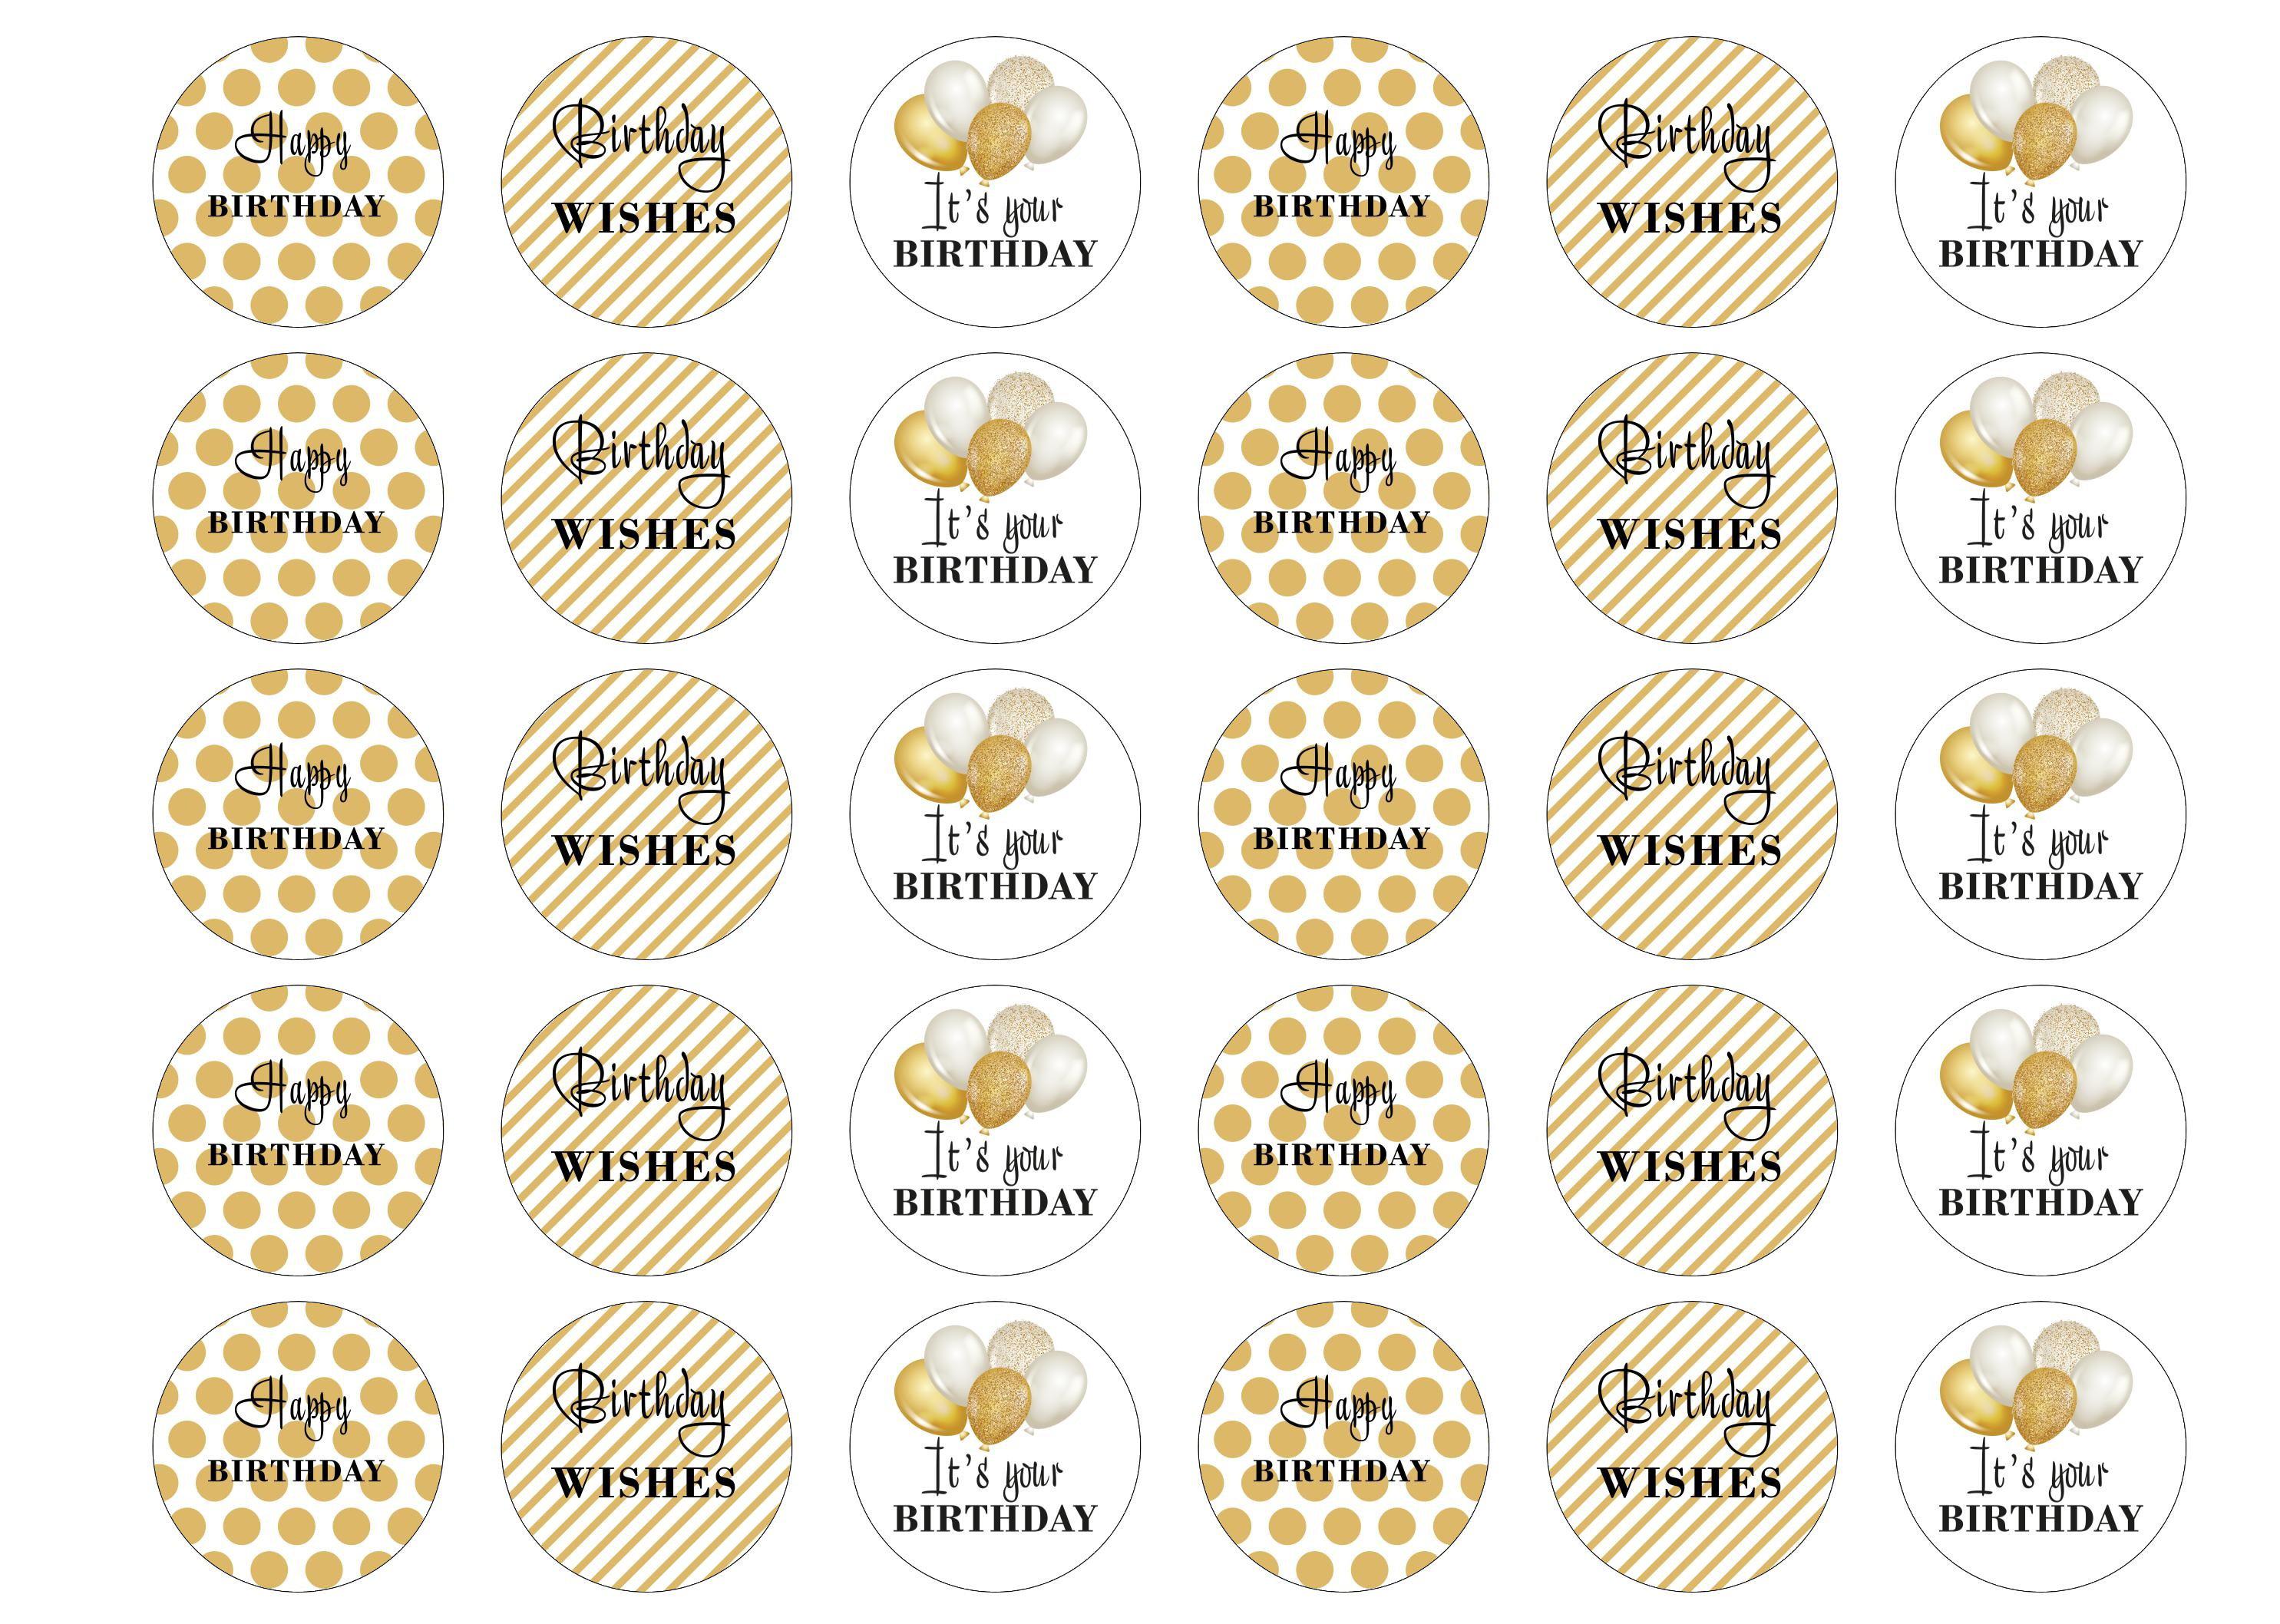 30 edible toppers with gold spots,gold stripes and gold balloons for a happy birthday